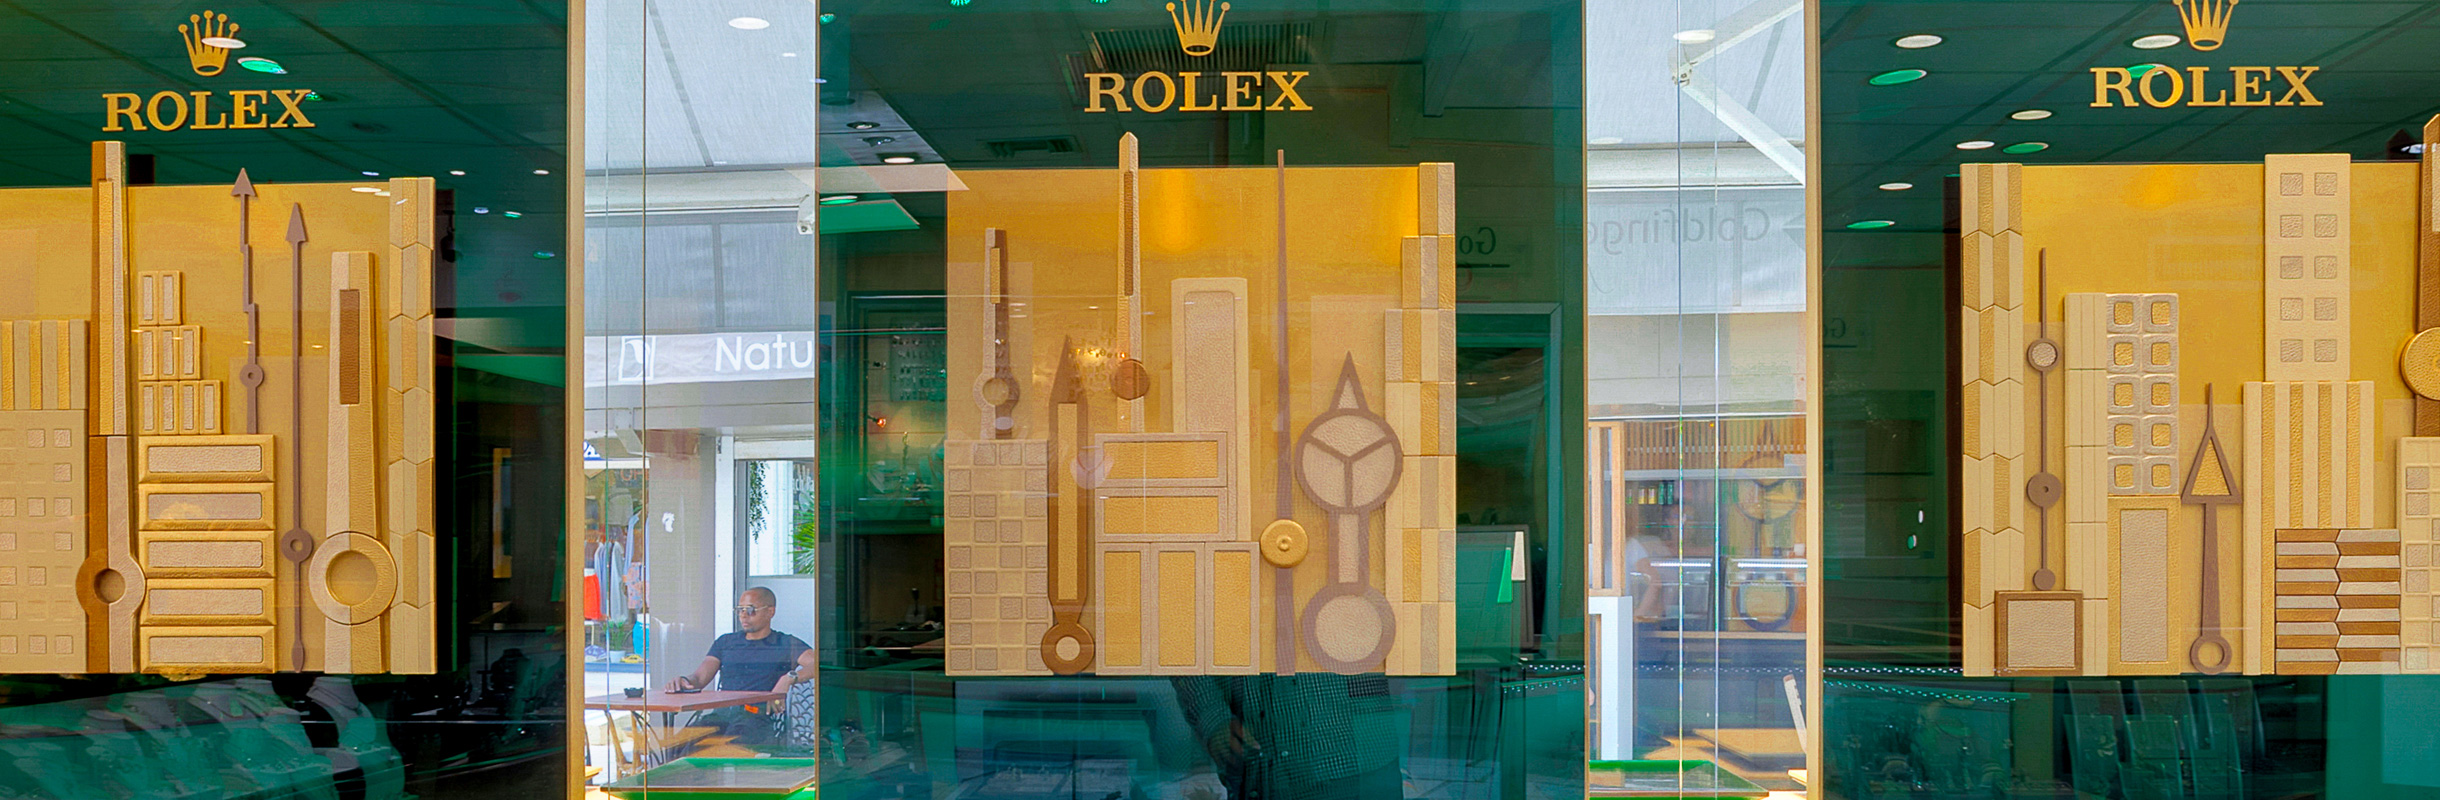 Rolex and Goldfinger history - St. Martin